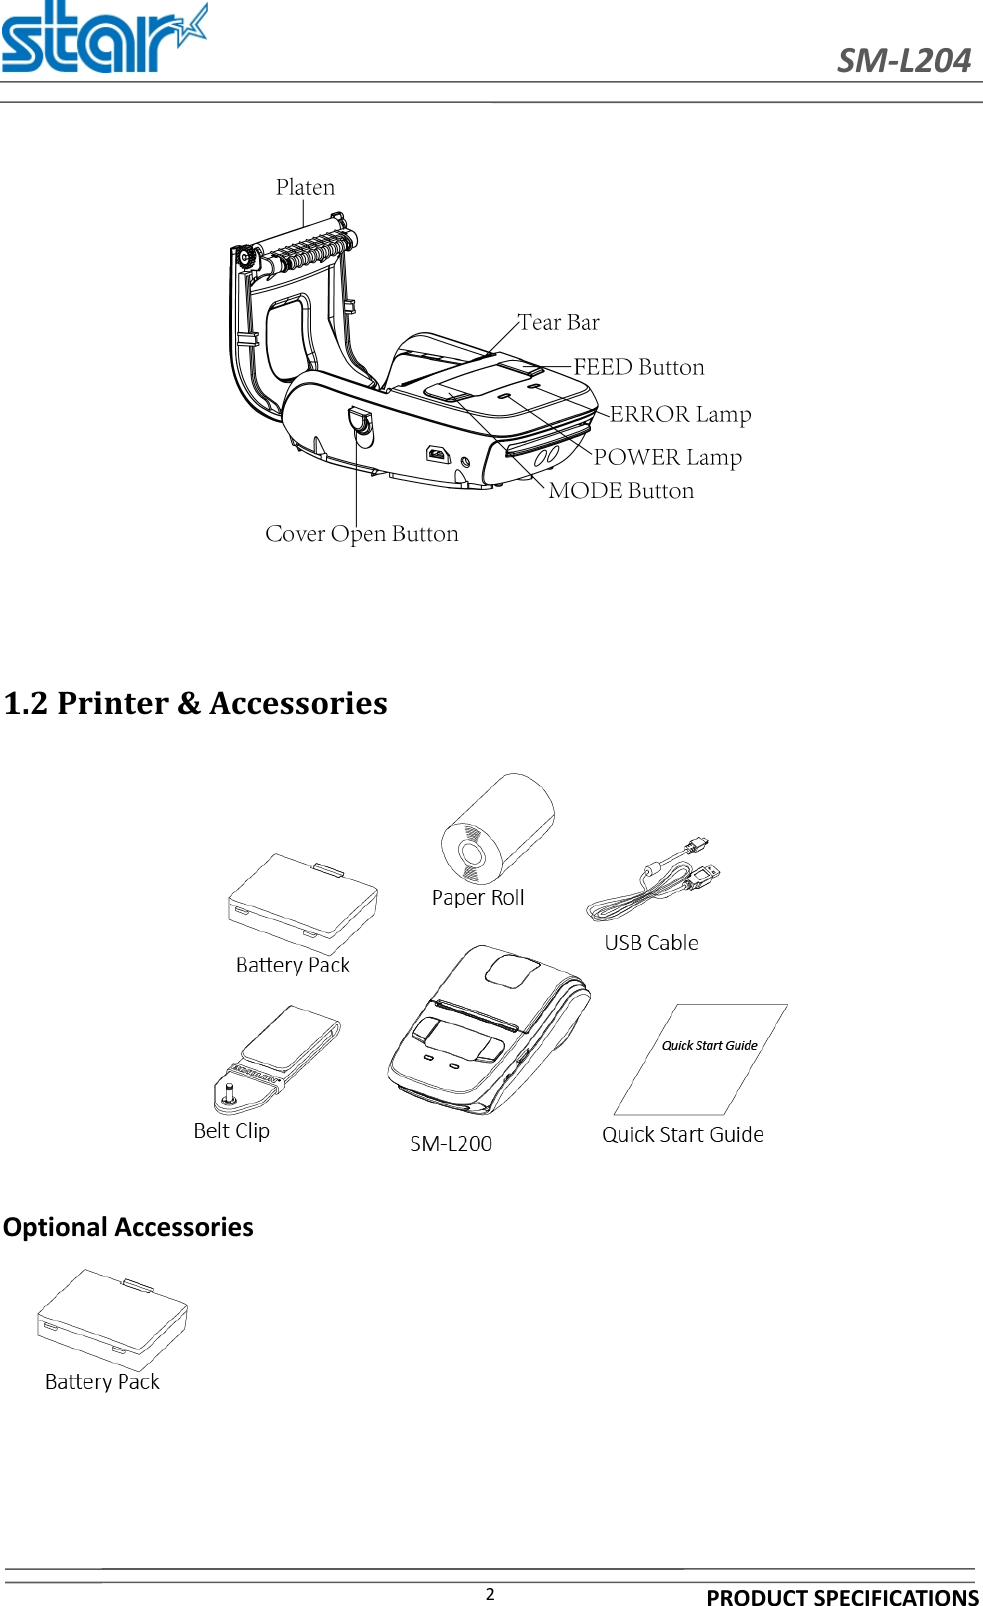 SM-L204PRODUCT SPECIFICATIONS21.2 Printer &amp; AccessoriesOptional Accessories